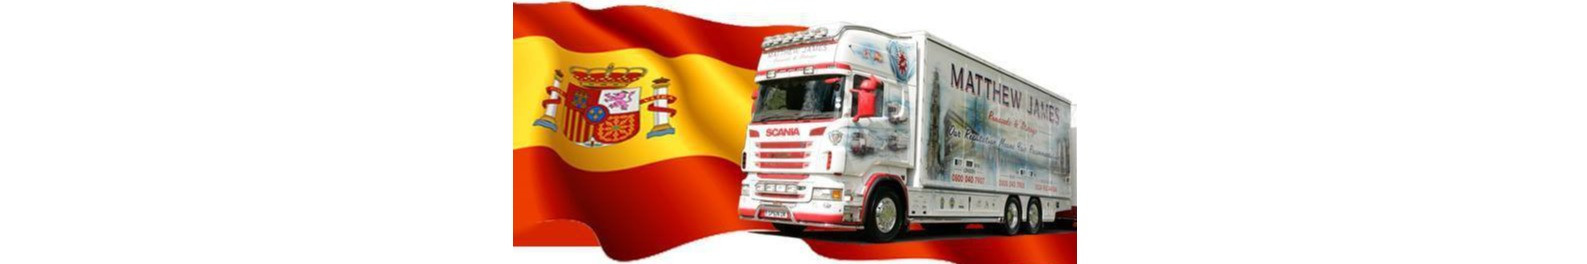 Removals from Spain to the UK, local removals in Mijas Costa